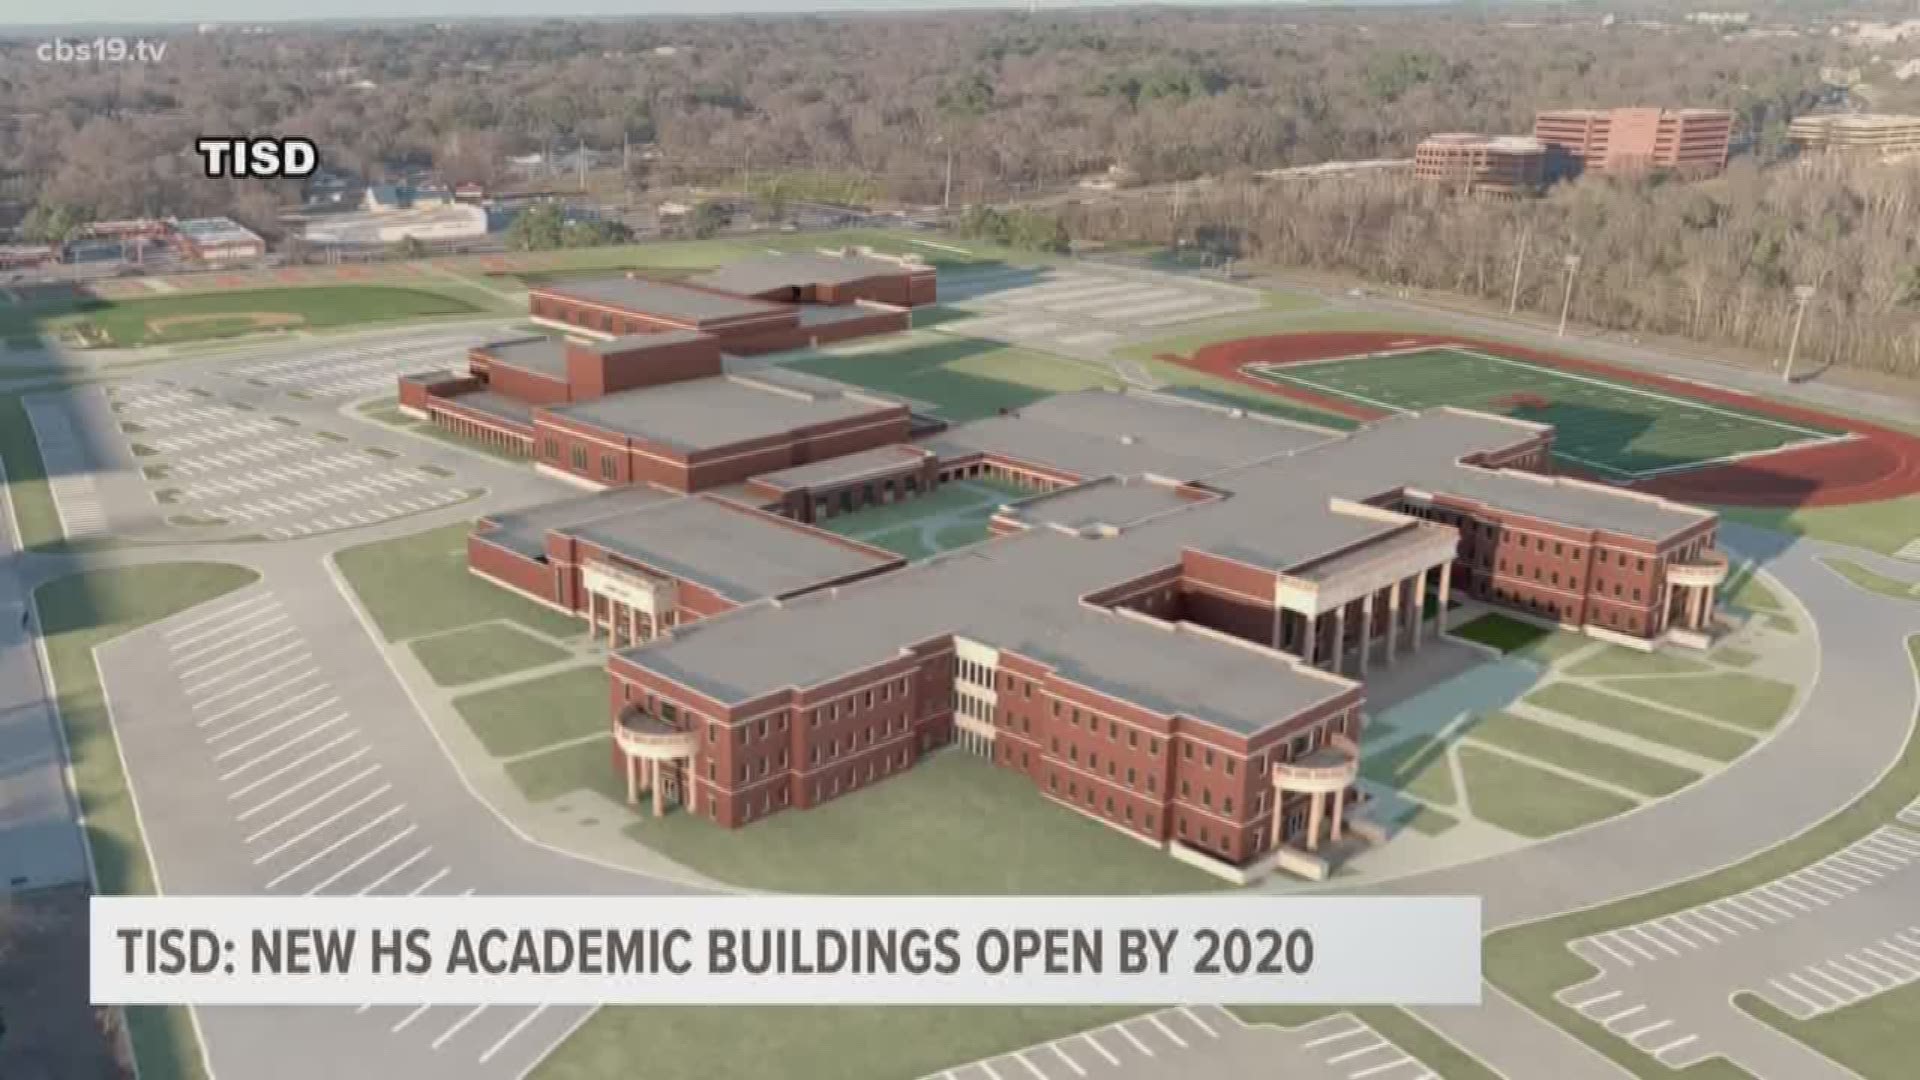 Project managers are optimistic the new academic buildings will be completed in January of 2020 for John Tyler and August of 2020 for Robert E. Lee.